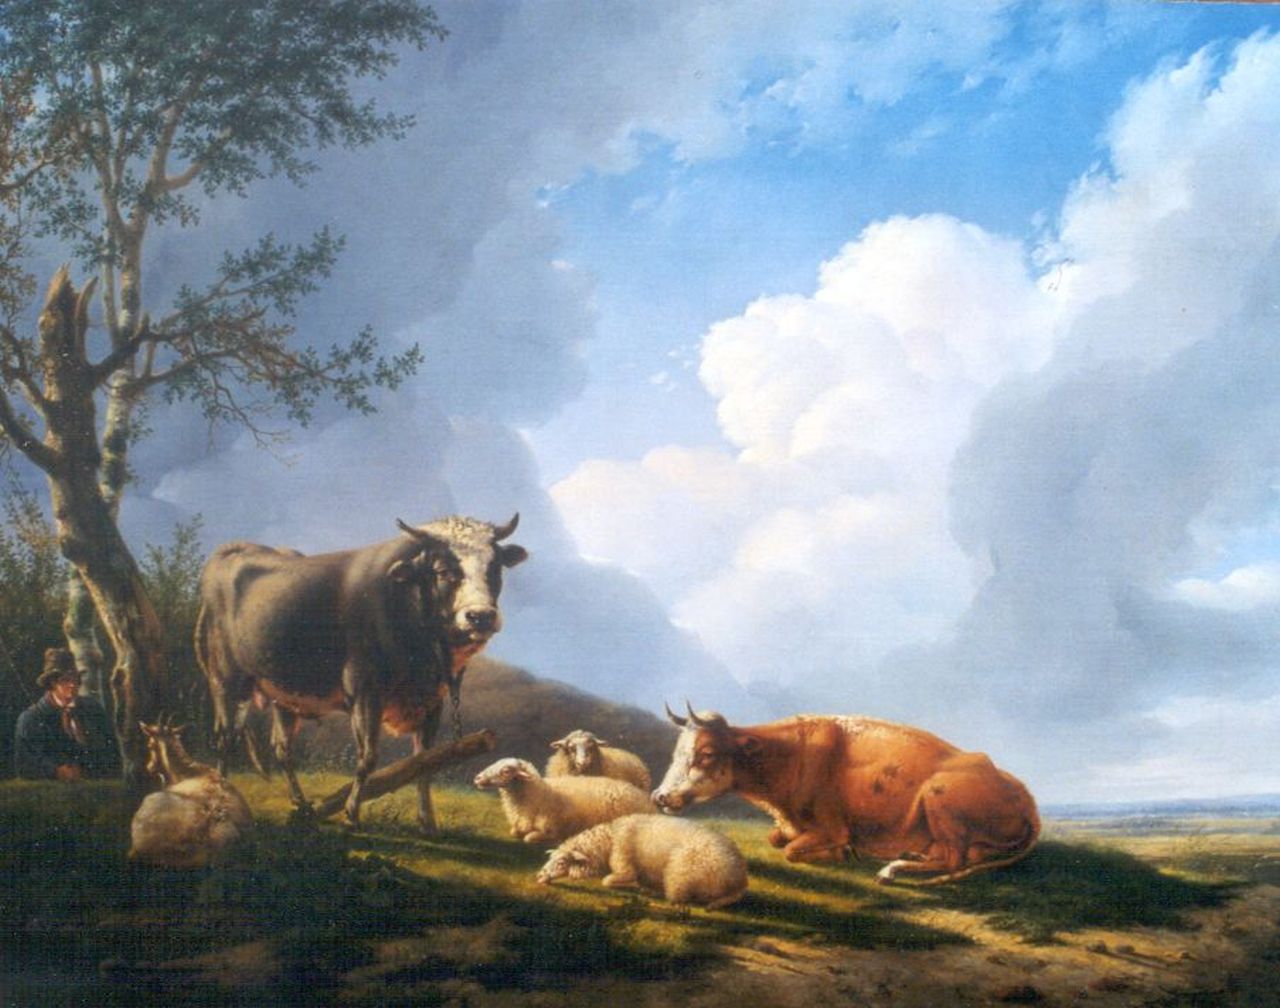 Hagenbeek Ch.  | Charles Hagenbeek, Cows and sheep resting in a summer landscape, oil on canvas 89.2 x 118.7 cm, signed with monogram on bull and tree trunk